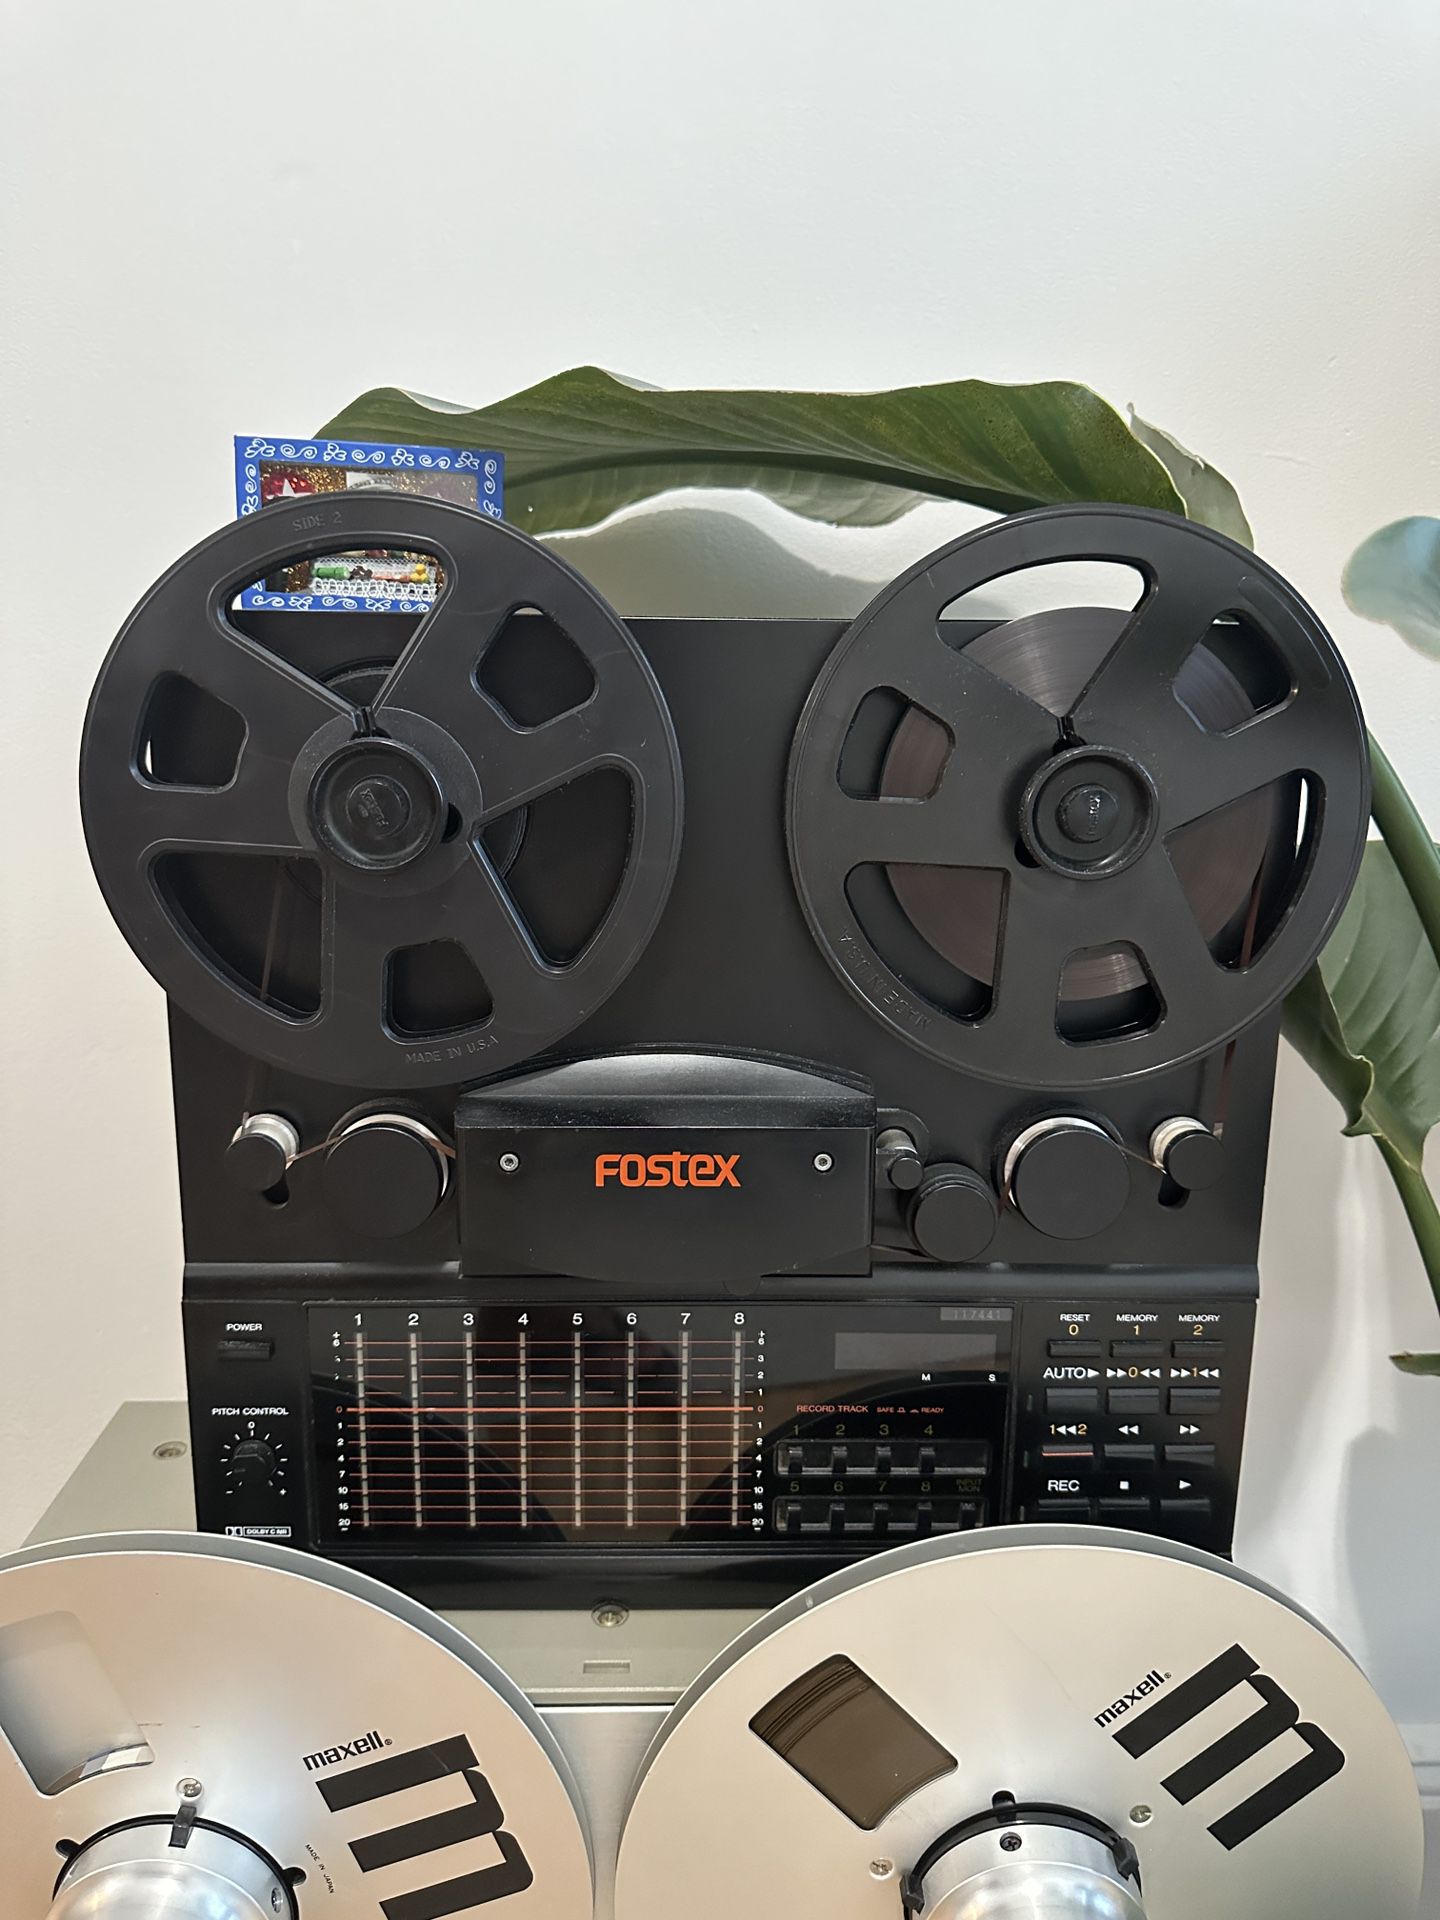 Fostex model 80 - 8 Track Recorder for Sale in New York, NY - OfferUp